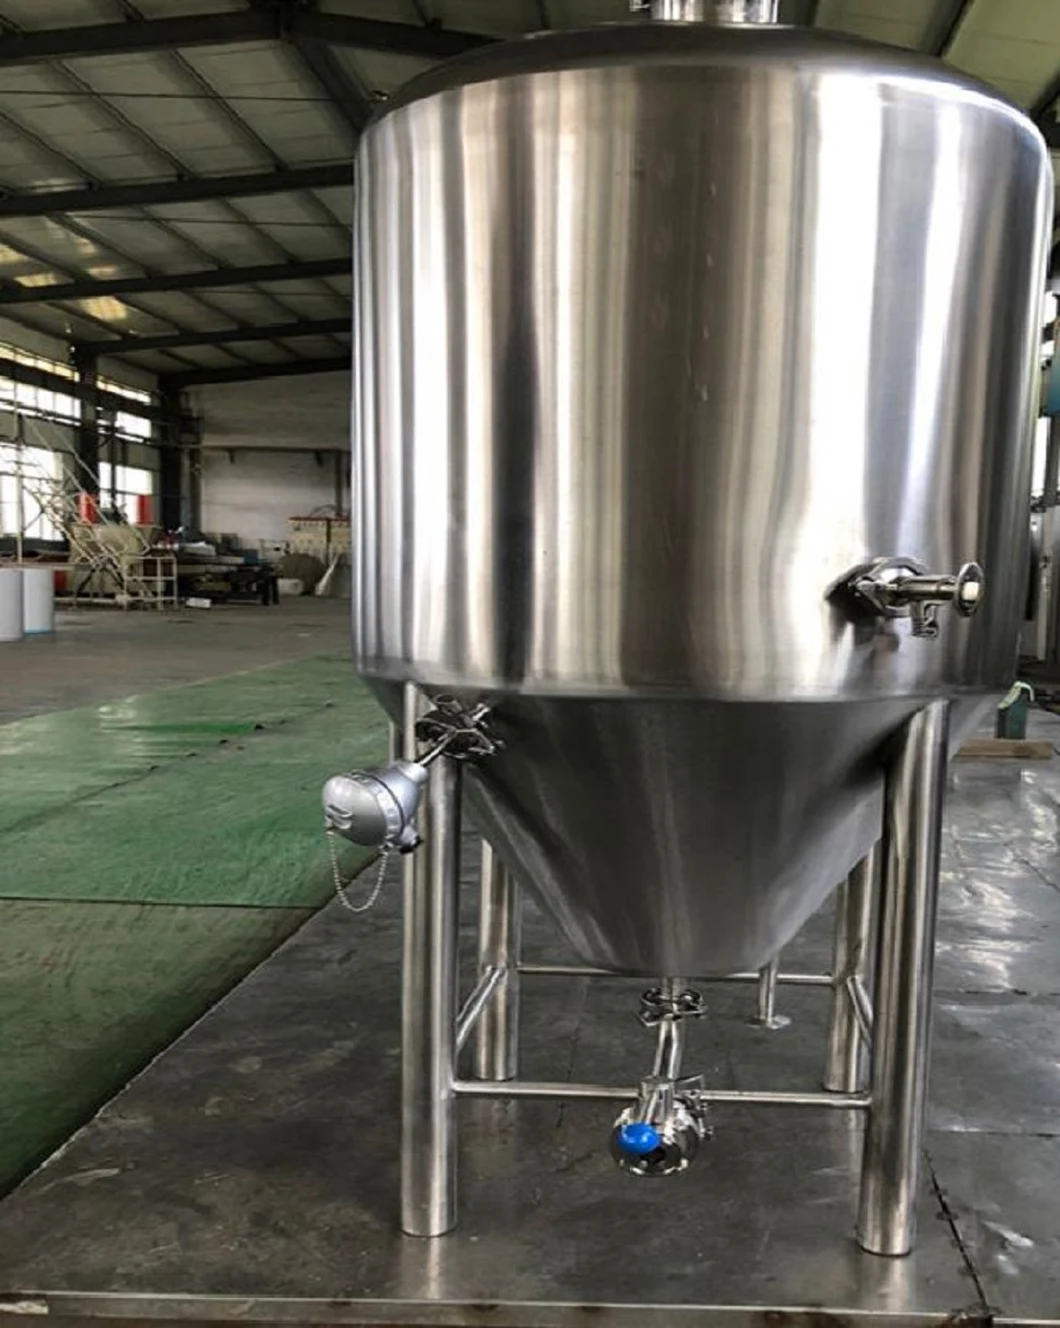 500L 1000L 2000L Stainless Steel Brewing Beer Fermenting Vessel and New Condition Beer Fermentation Equipment